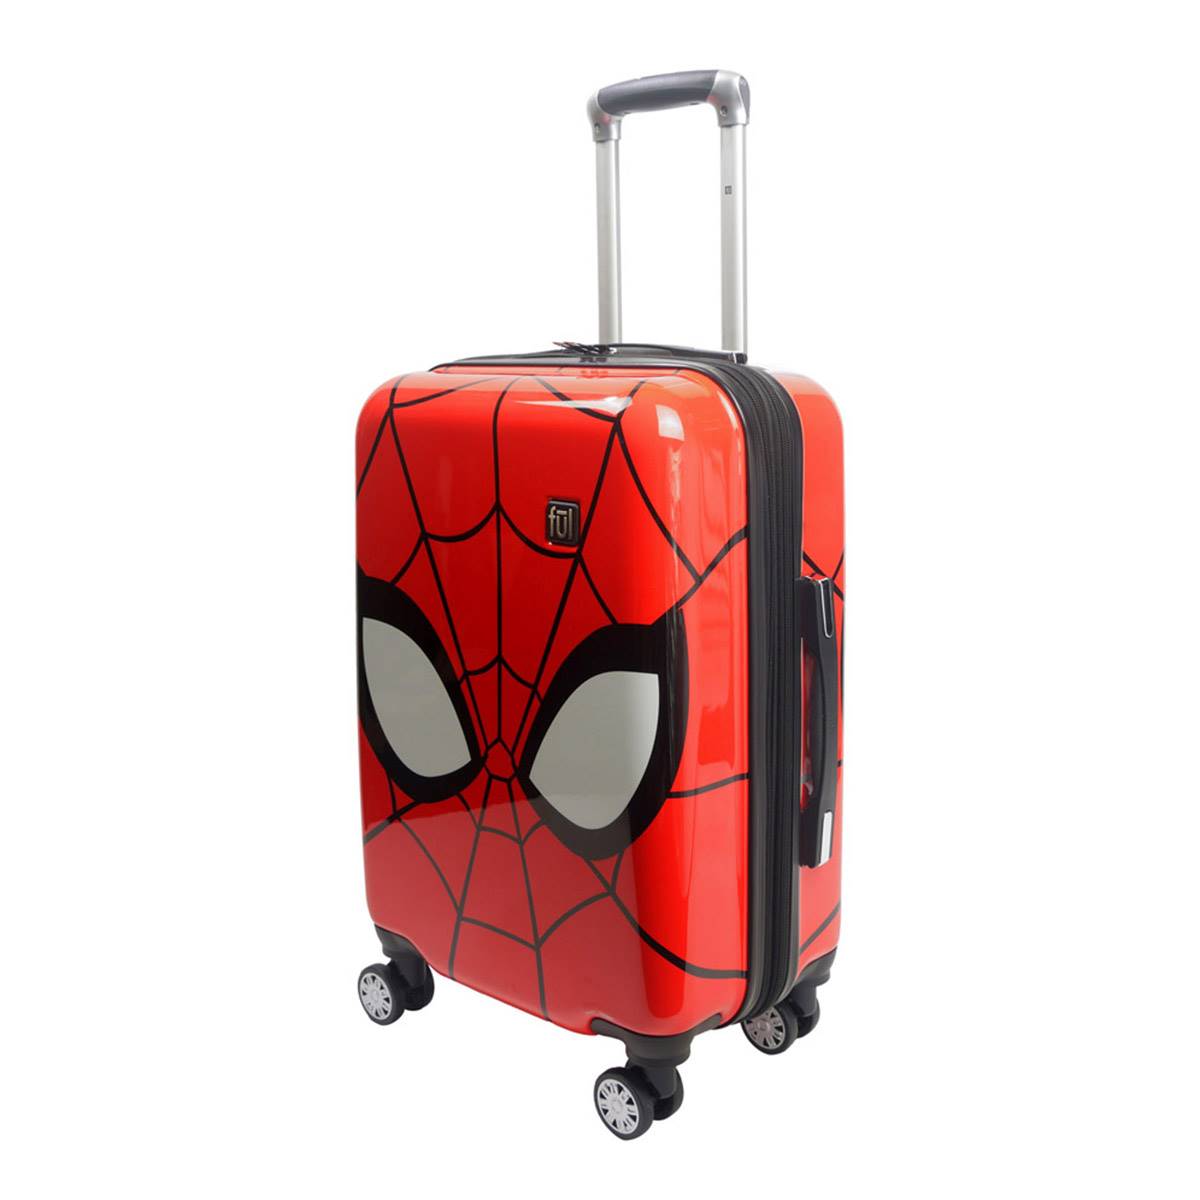 FUL Marvel 21in. Spider-Man Hardside Carry-On Luggage